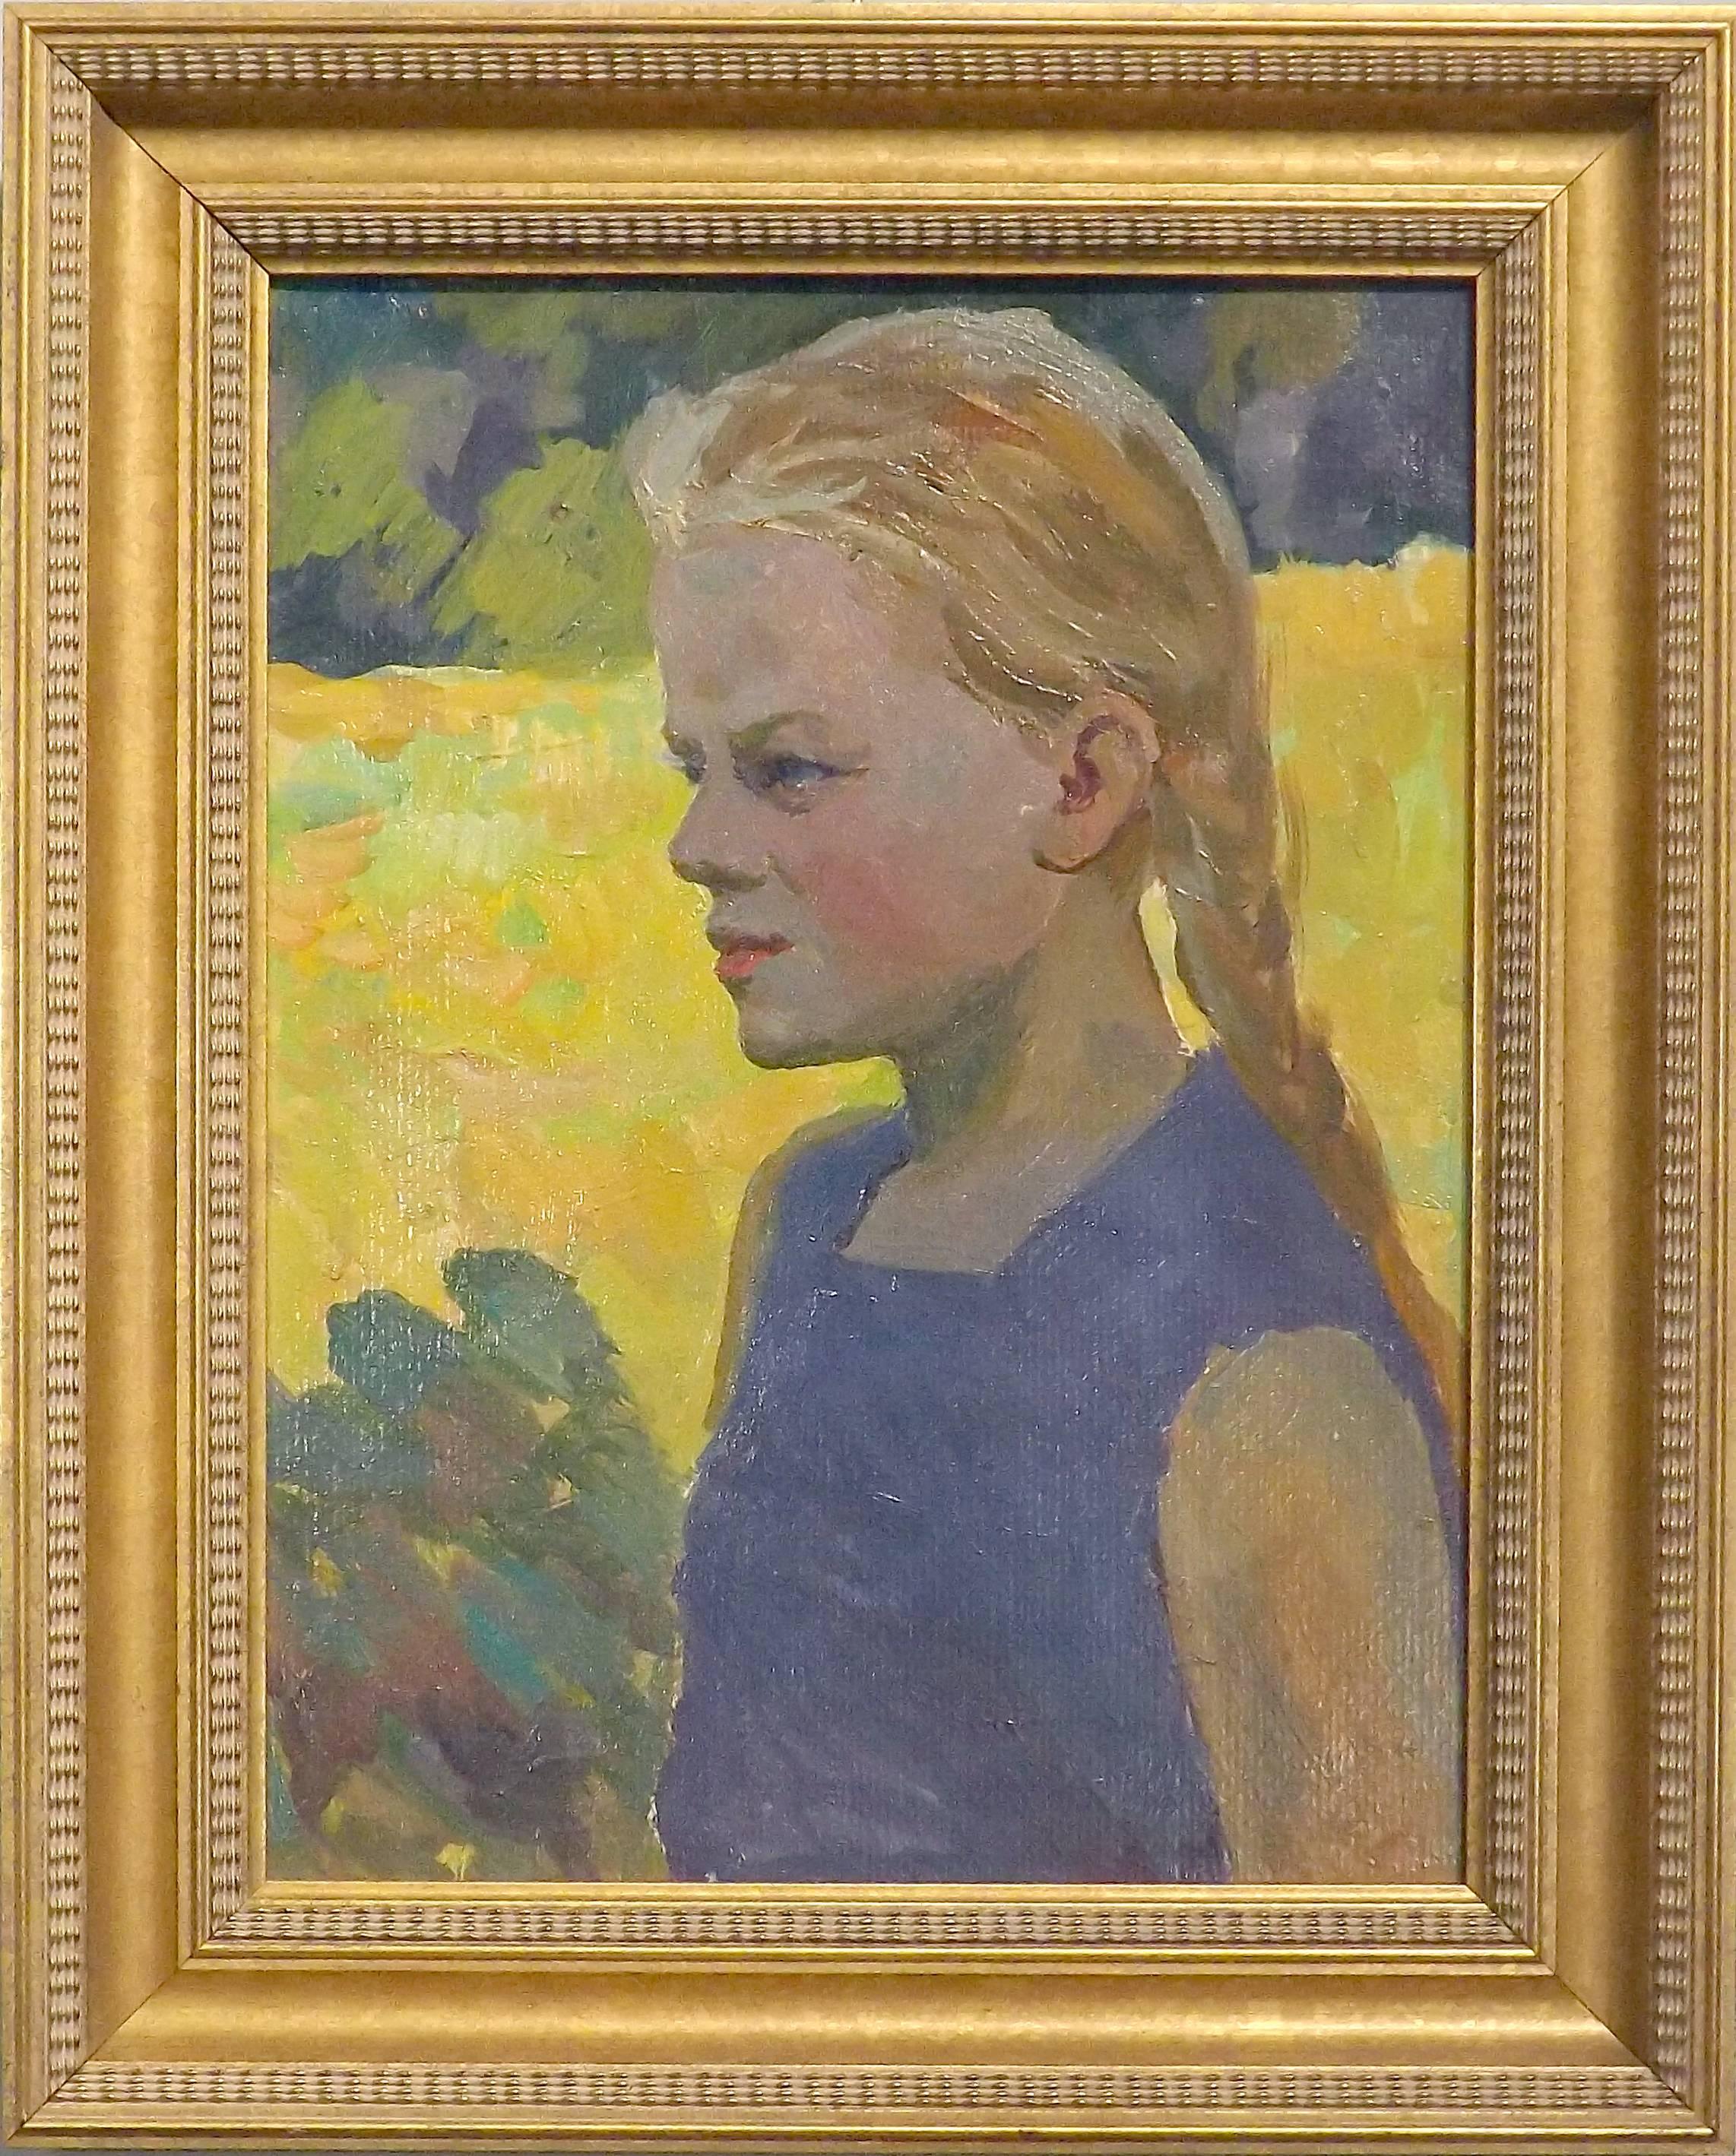 A beautiful social realist painting of a young girl with a long braid and a blue dress painted by Iosif Mikhaylovich Ilyin, dated 1970. Ilyin studied at Ivanov and Kiev before World War II (The Great Patriotic War), and continued his education in